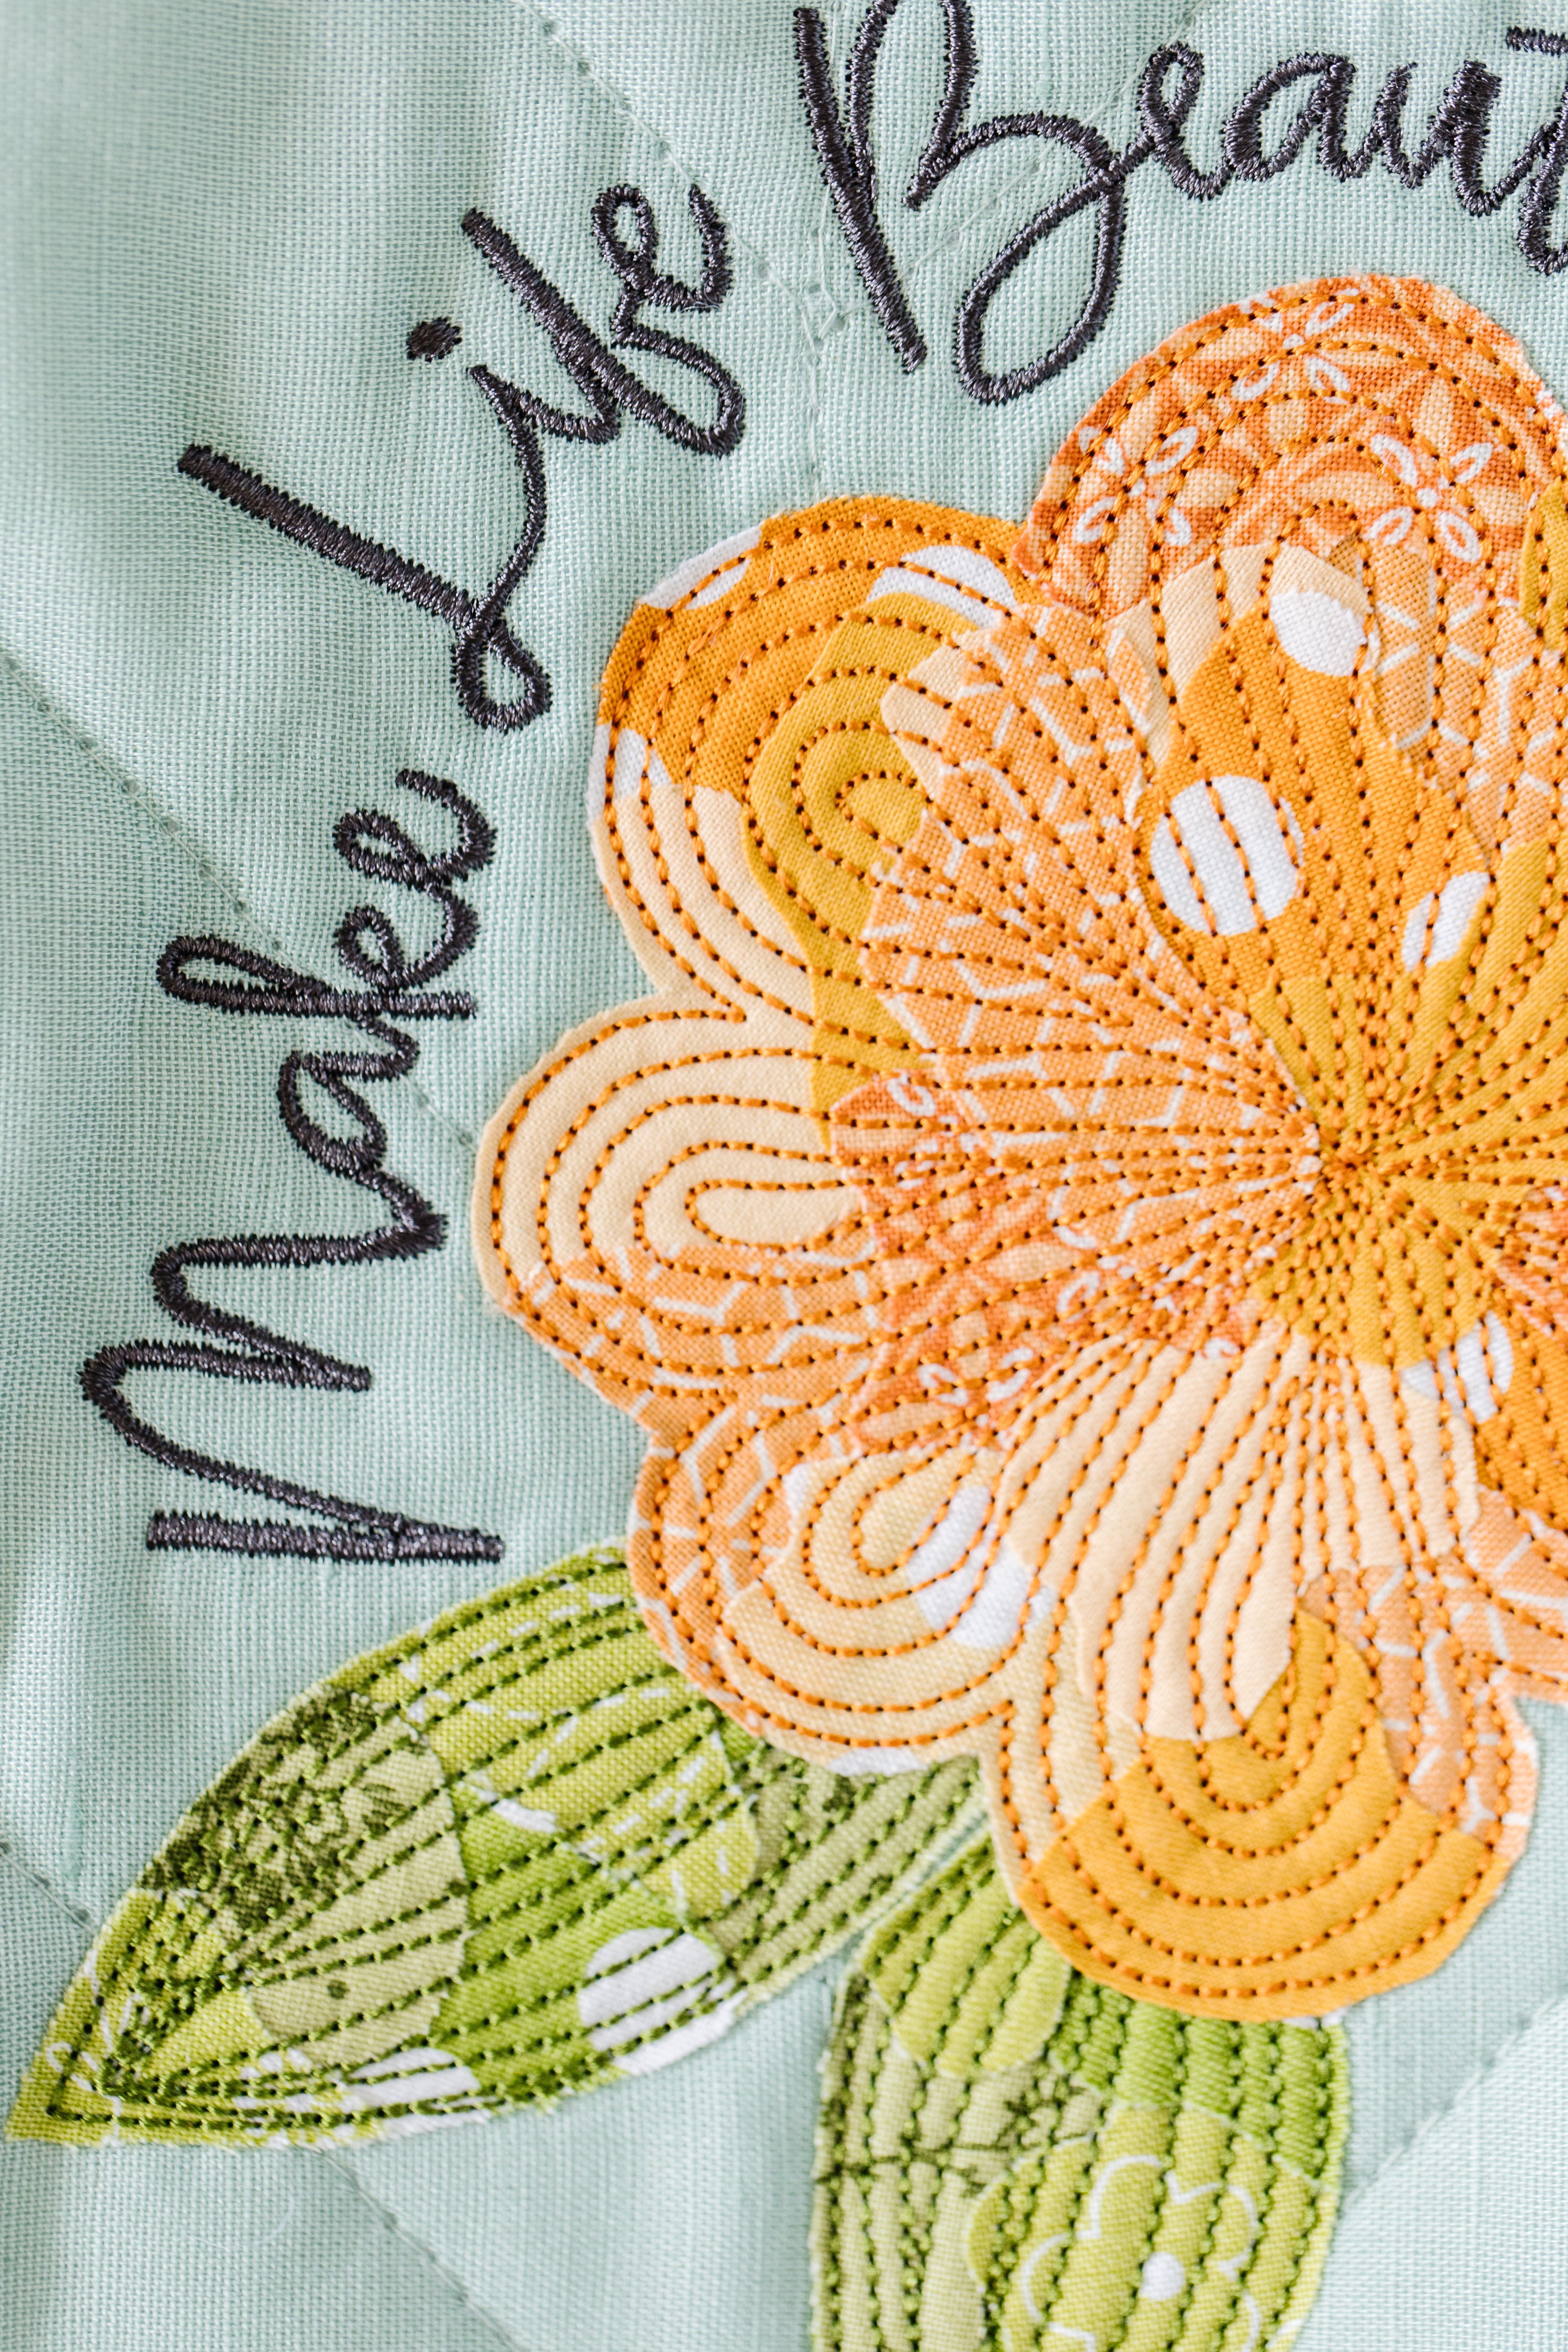 How to Collage Applique on Your Embroidery Machine